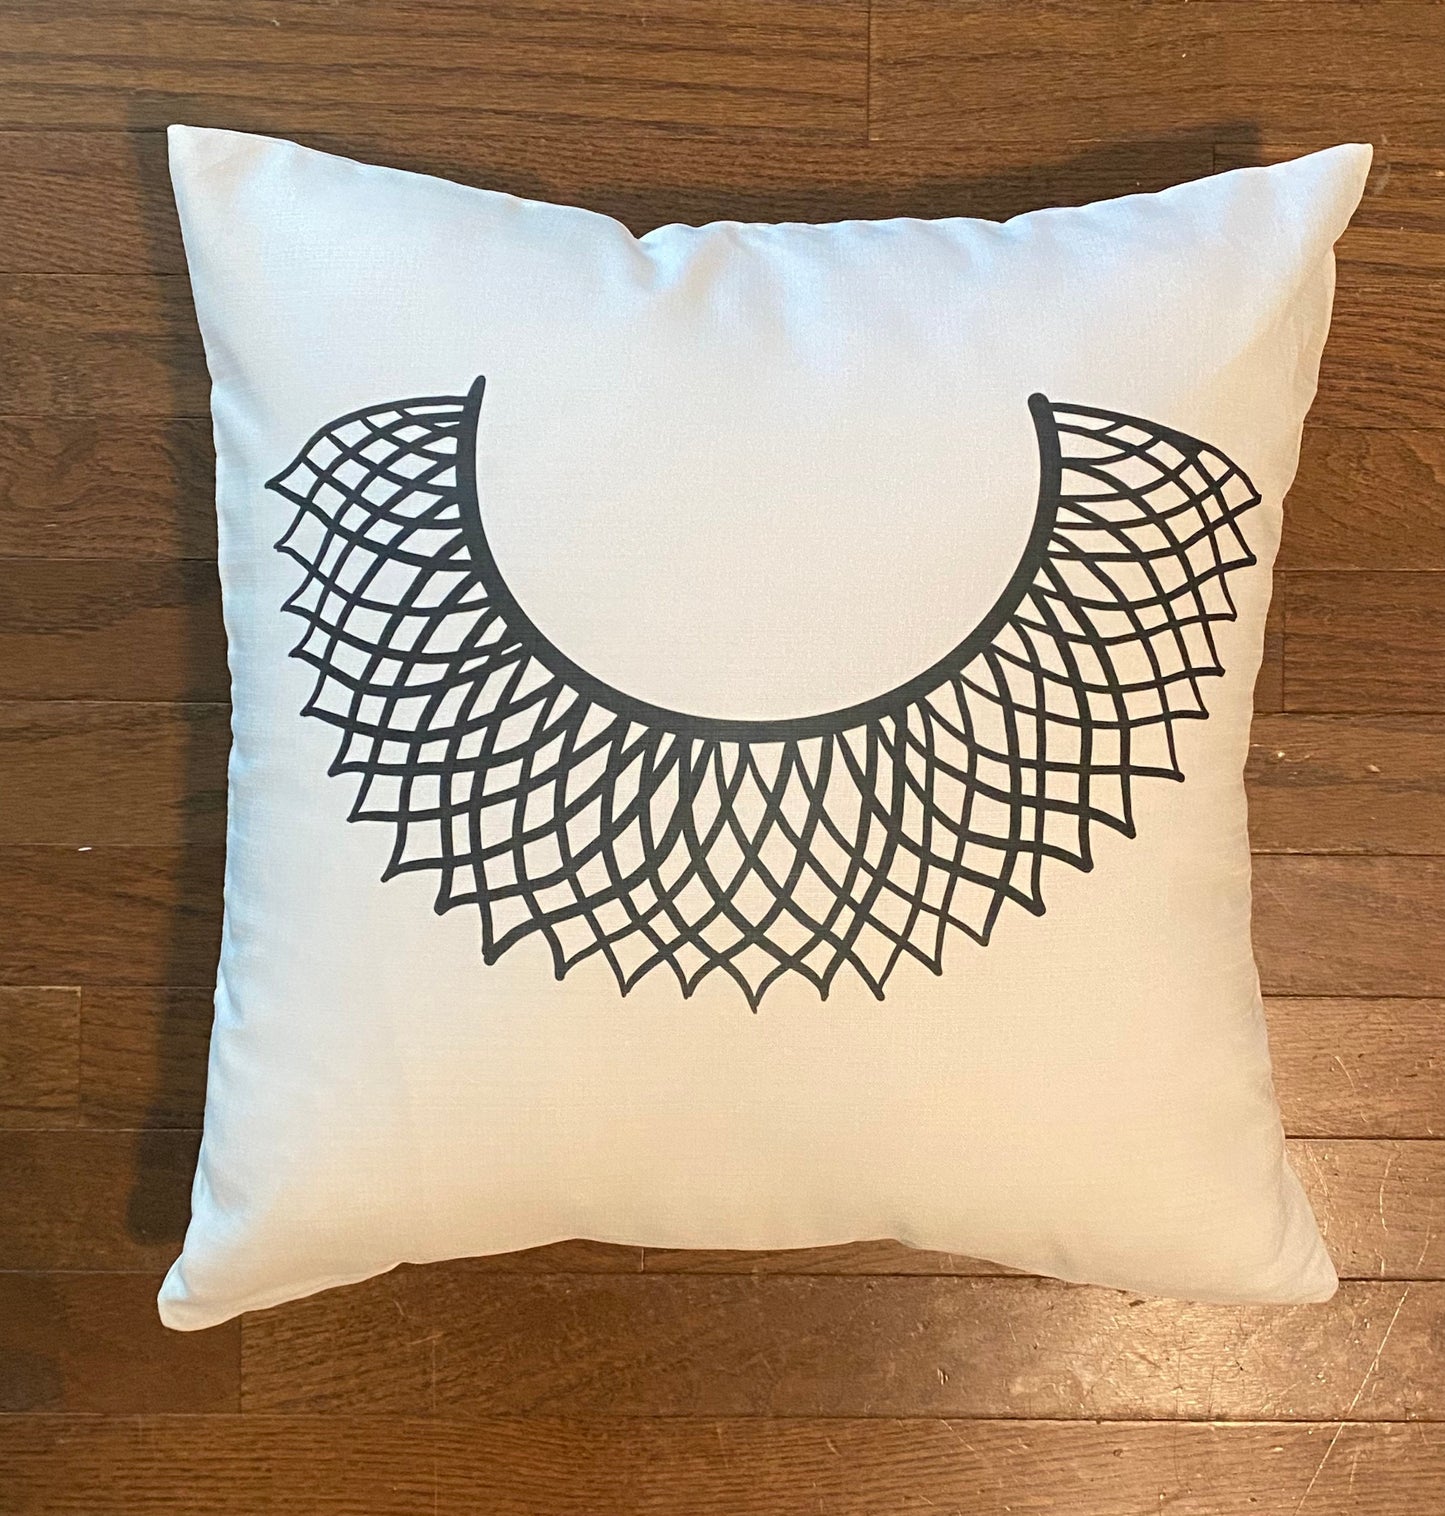 Dissent Collar Throw Pillow Covers - various quantities